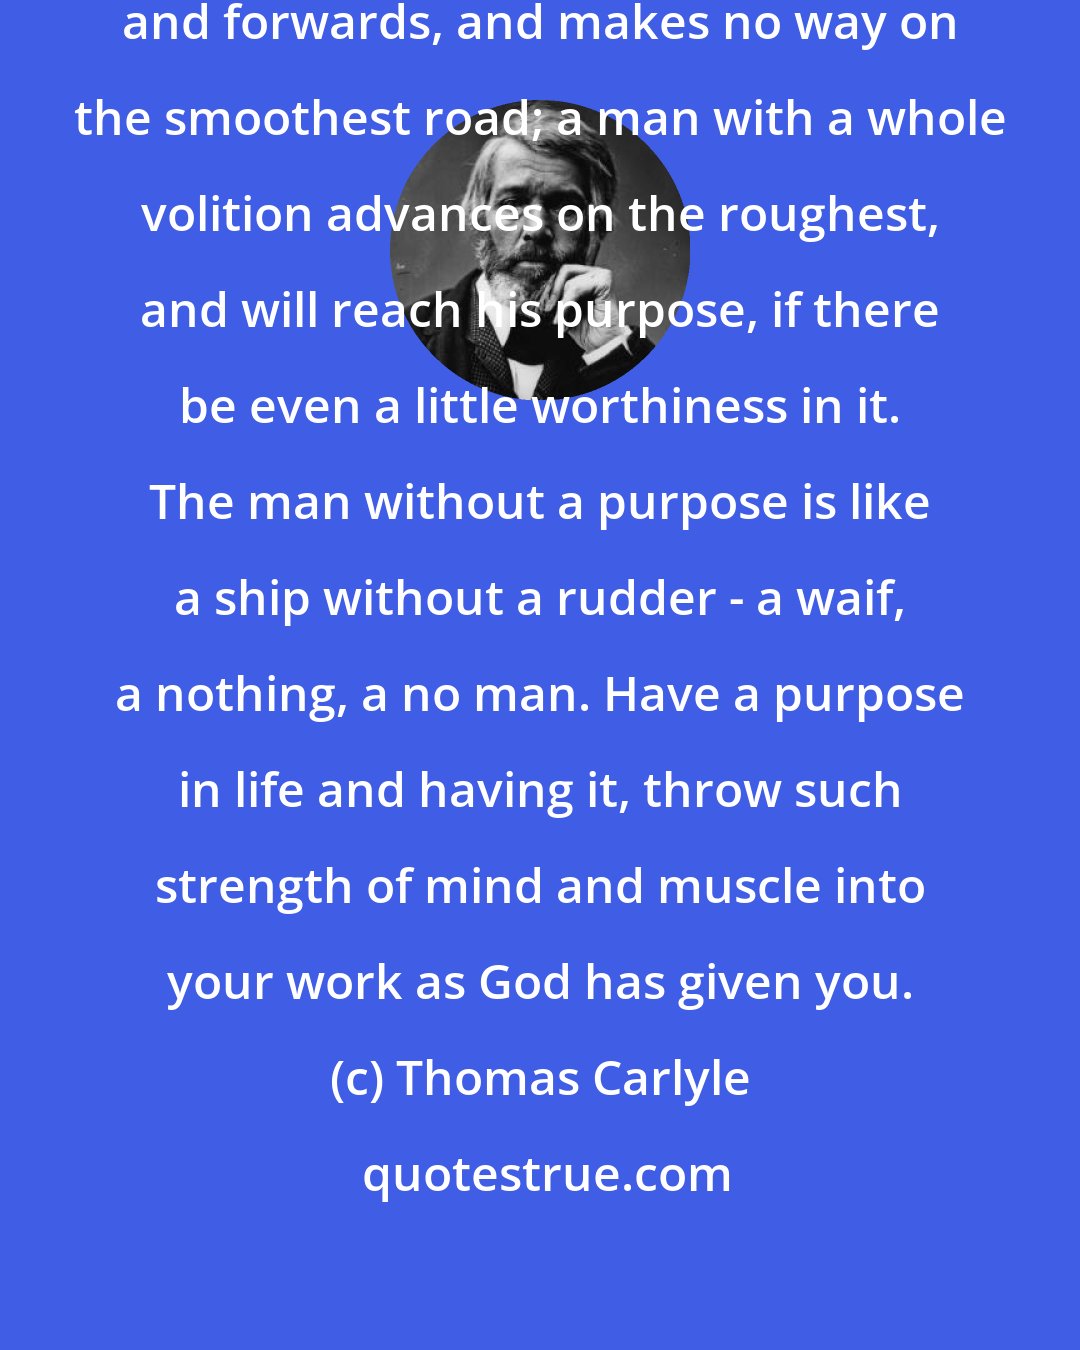 Thomas Carlyle: A man with a half volition goes backwards and forwards, and makes no way on the smoothest road; a man with a whole volition advances on the roughest, and will reach his purpose, if there be even a little worthiness in it. The man without a purpose is like a ship without a rudder - a waif, a nothing, a no man. Have a purpose in life and having it, throw such strength of mind and muscle into your work as God has given you.